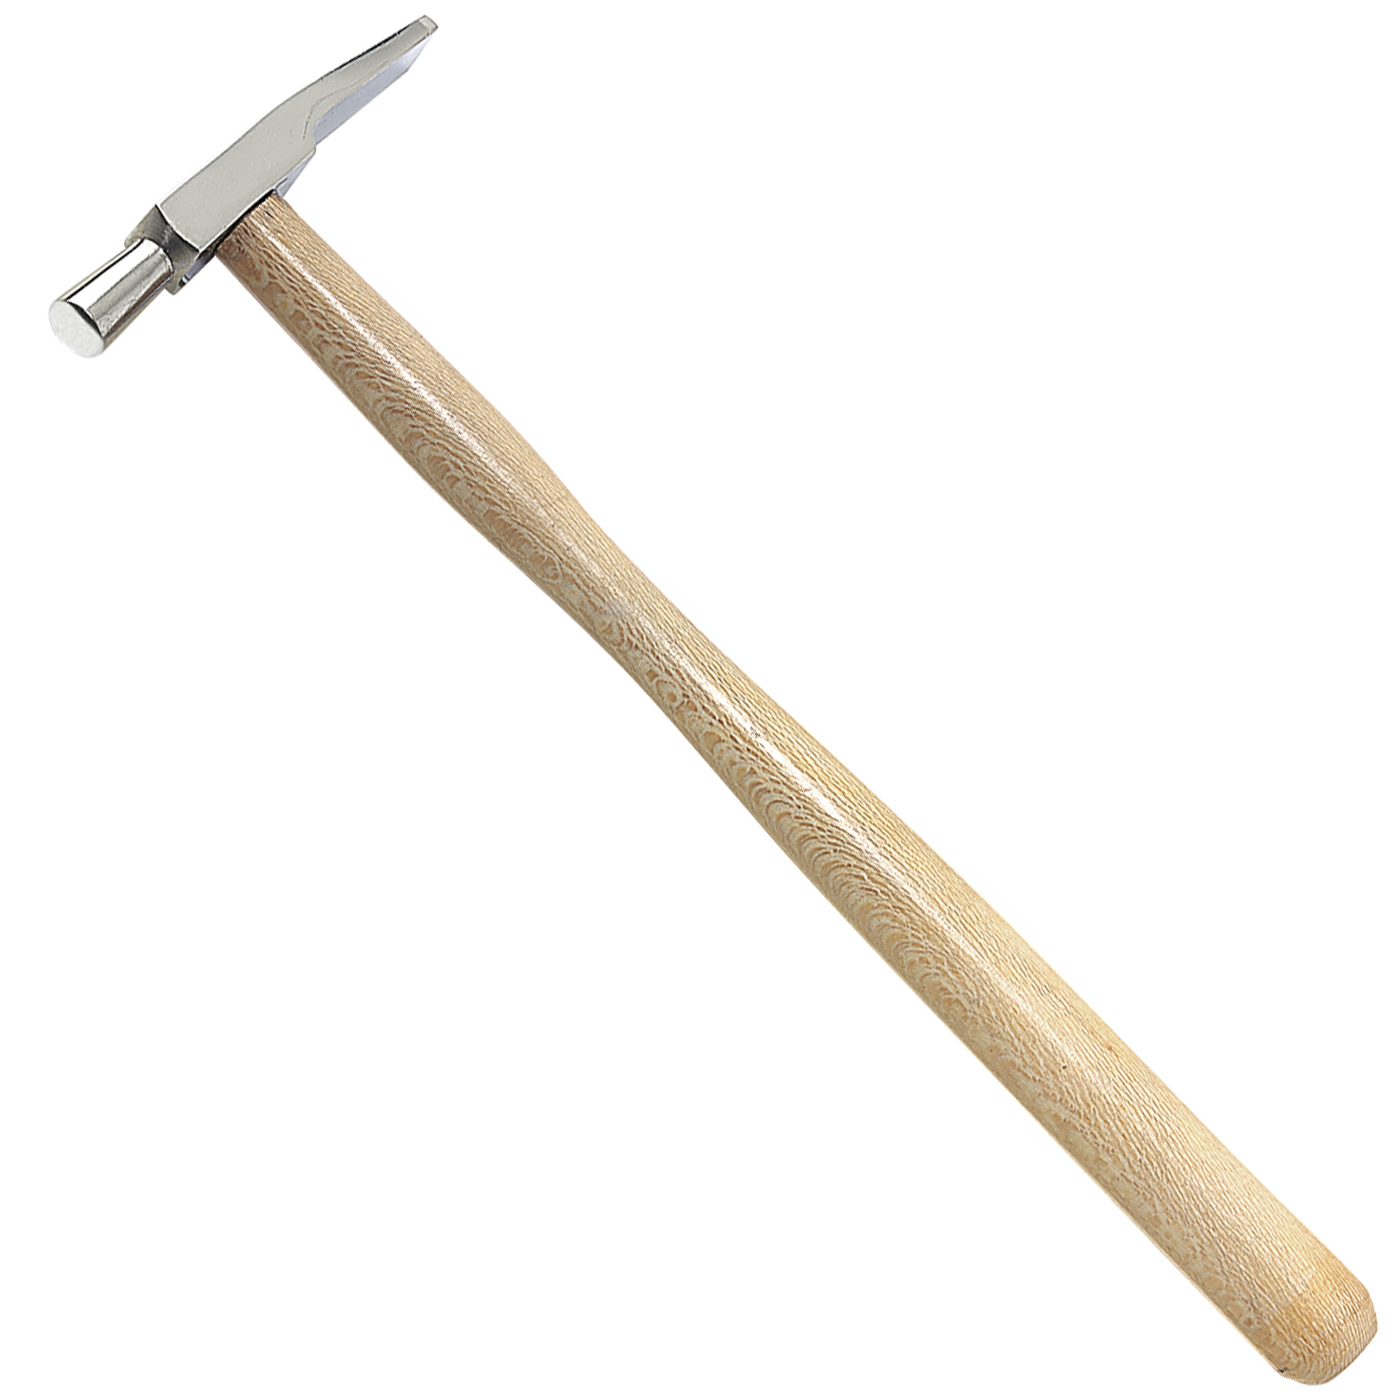 FINO Riveting Hammer, Wooden Handle, Wide/Pointed, 210 mm - 1 piece